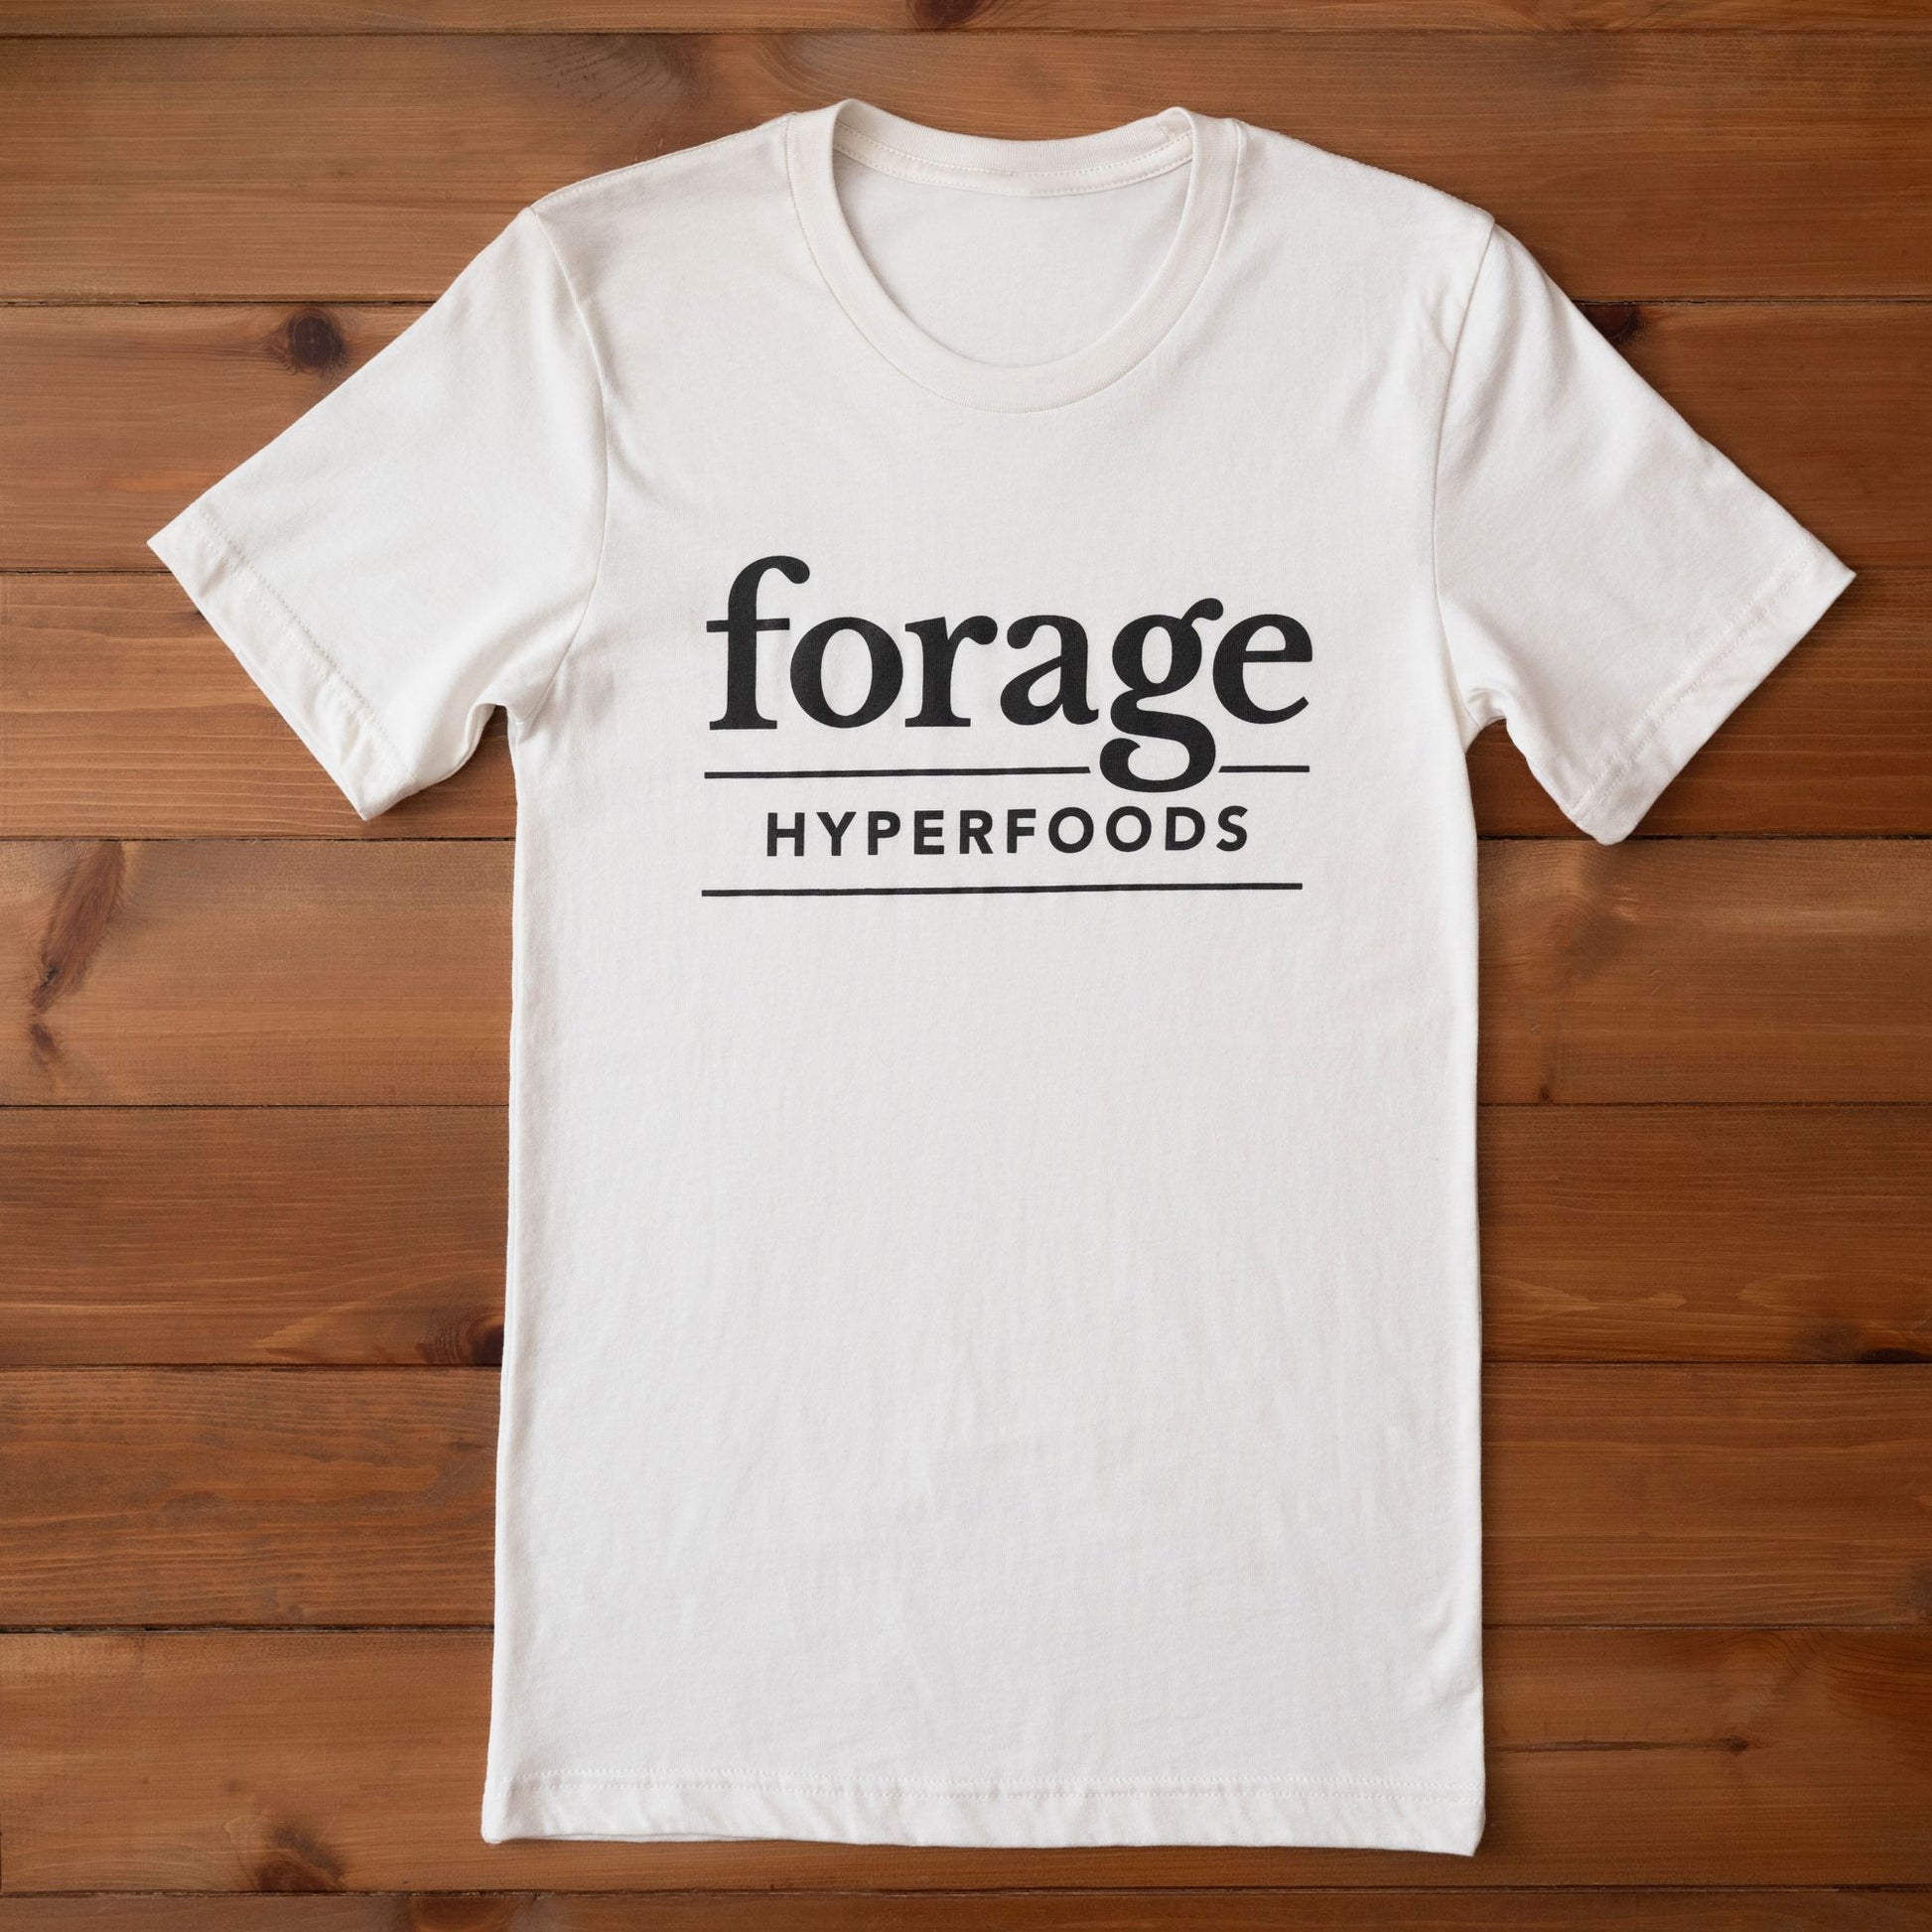 A full lenght vintage white shirt with teh Forage Hyperfoods logo on it. 